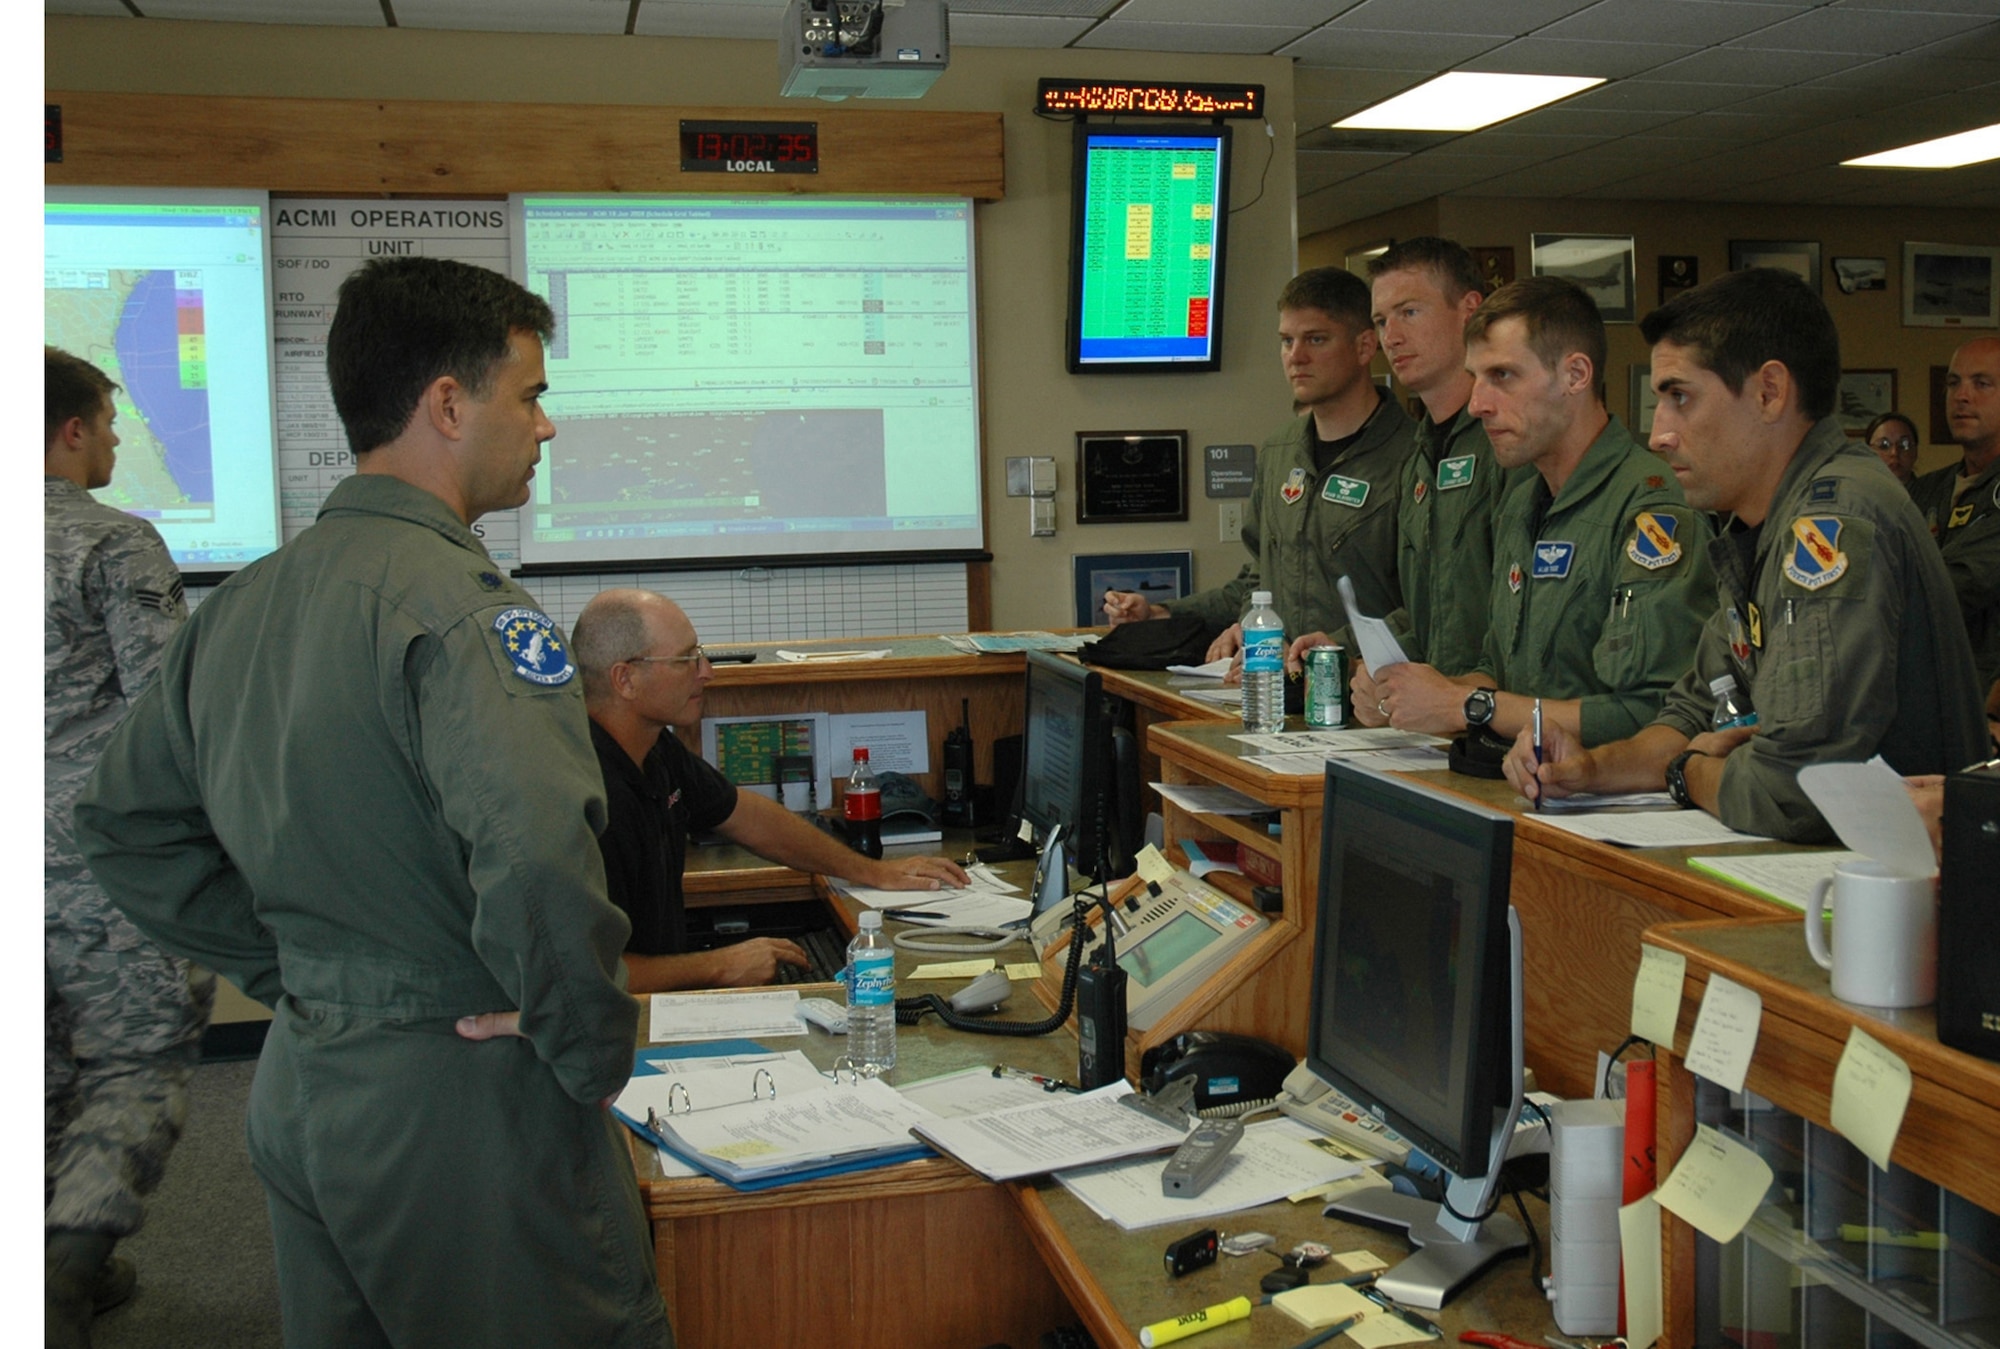 TYNDALL AIR FORCE BASE, Fla. - Lieutenant Col. Christopher Didier, 4th Operations Support Squadron assistant director of operations, briefs F-15E Strike Eagle aircrew members prior to takeoff at Tyndall Air Force Base June 18. Members of the 333rd, 334th, 335th and 336th Fighter Squadrons traveled to Tyndall AFB to conduct dissimilar air combat tactics missions against F-22 Raptors assigned to the 43rd Fighter Squadron. The Strike Eagle units will return to Seymour Johnson AFB June 20 after completing nearly 36 DACT sorties against the F-
22 Raptor. (U.S. Air Force photo by Capt. Amanda Ferrell)